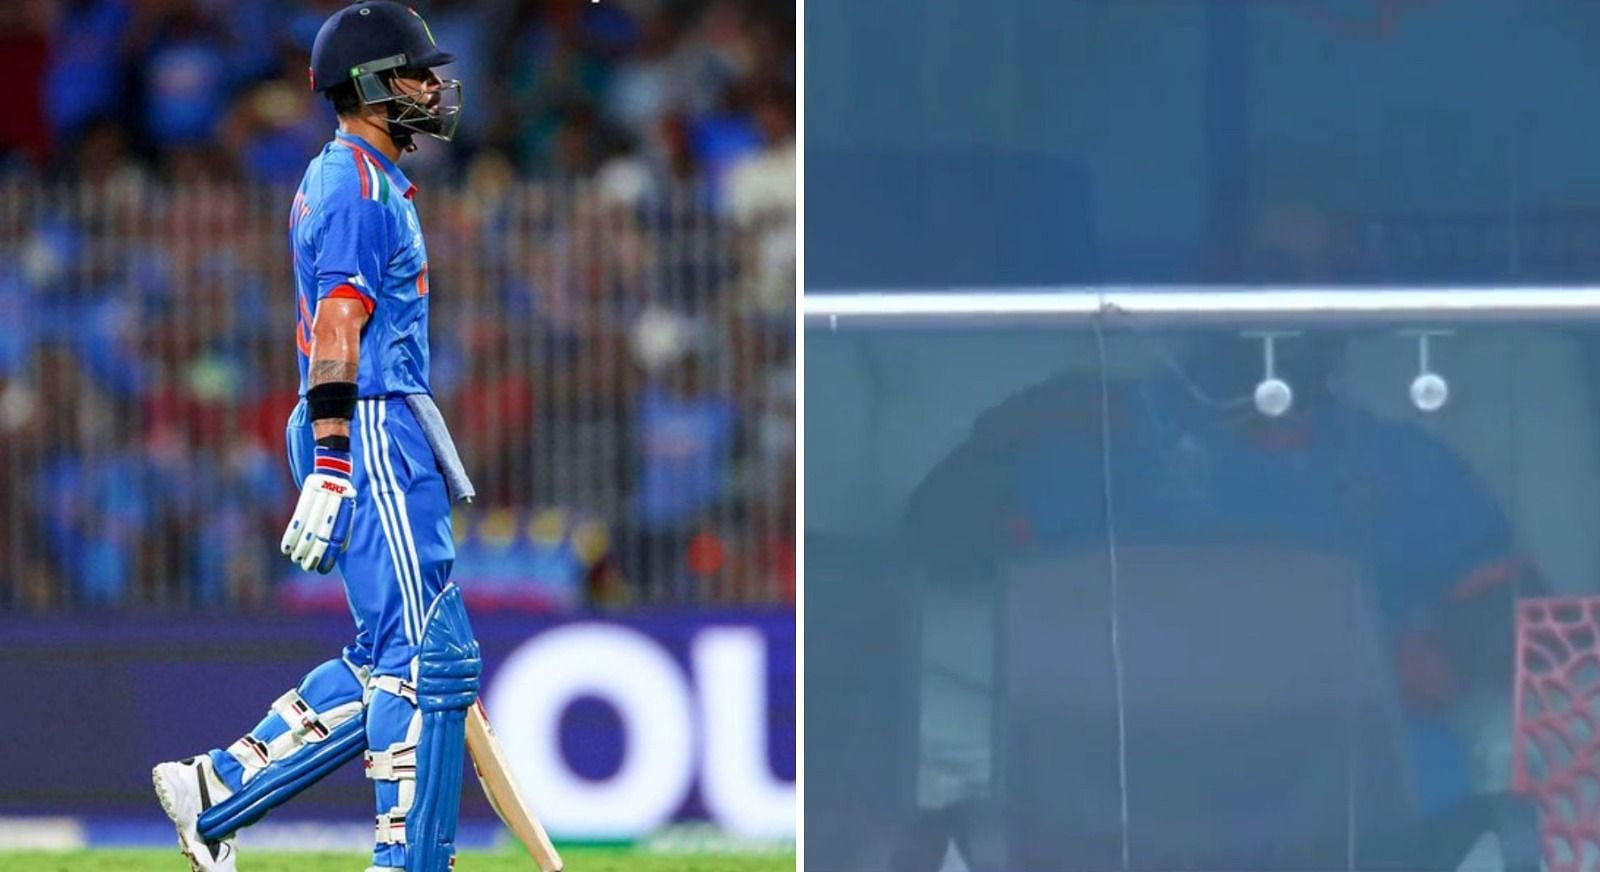 Virat Kohli departed for a nine-ball duck against England in the World Cup fixture.